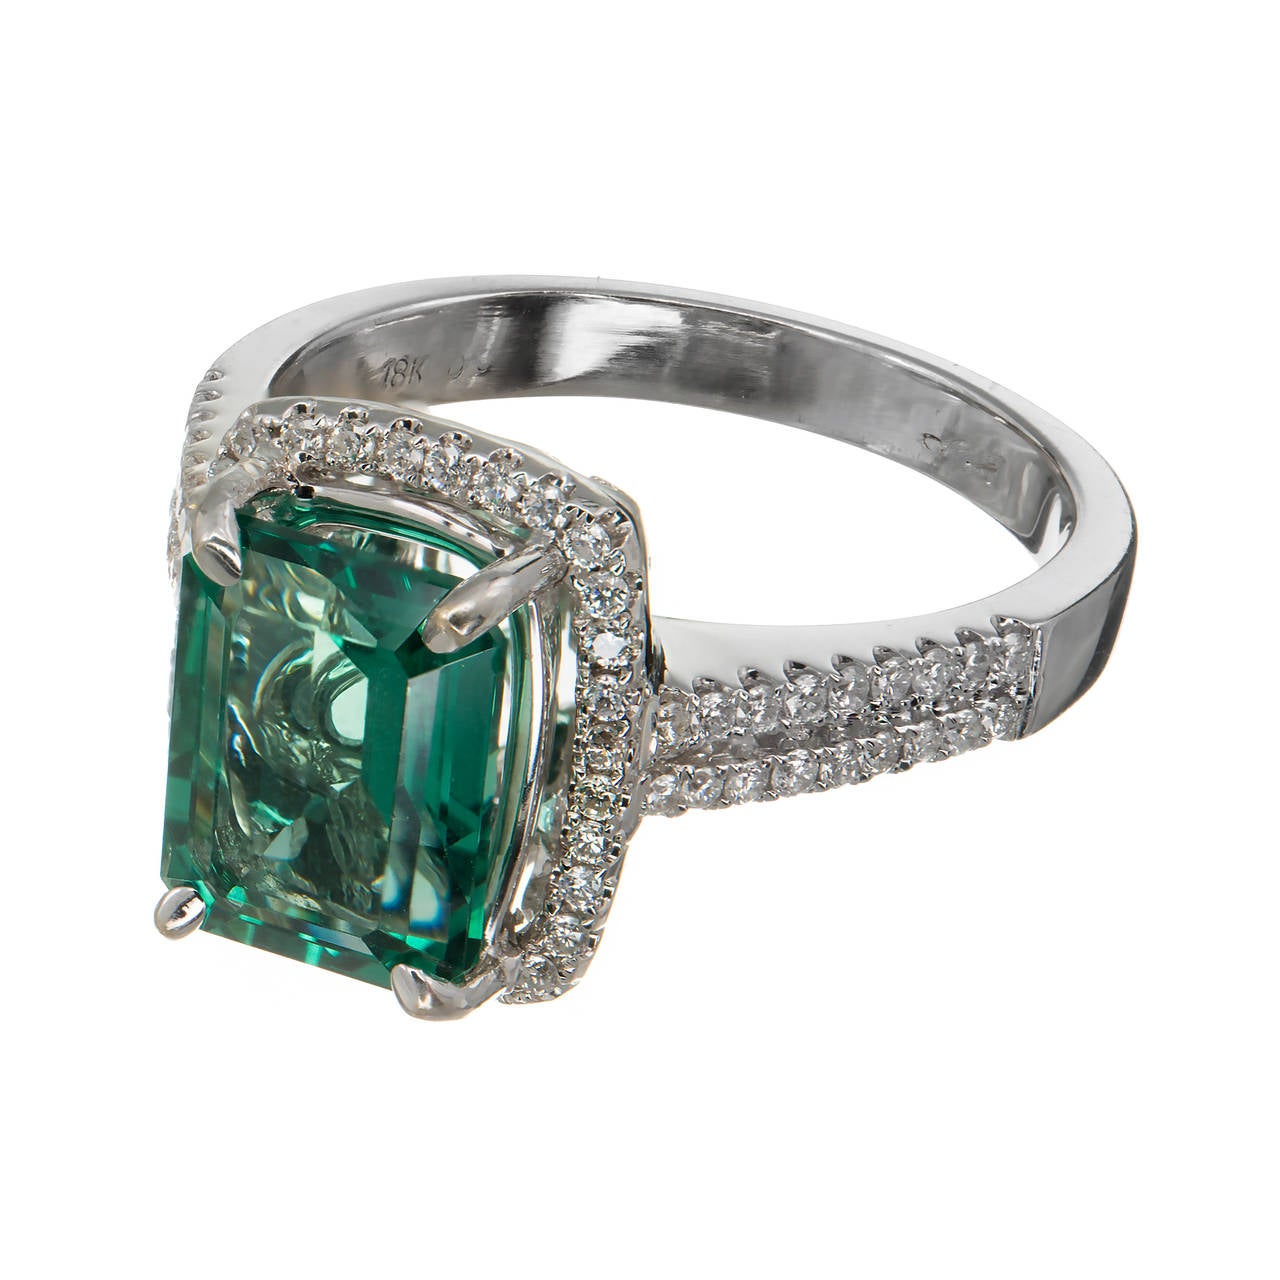 Estate bright green genuine Emerald cut Tourmaline with a hint of blue surrounded by bright white diamonds. Signed SB. Circa 1960-1970.

1 Emerald cut green Tourmaline, approx. total weight 3.10cts, 8.72 x 6.90mm
68 round full cut diamonds,